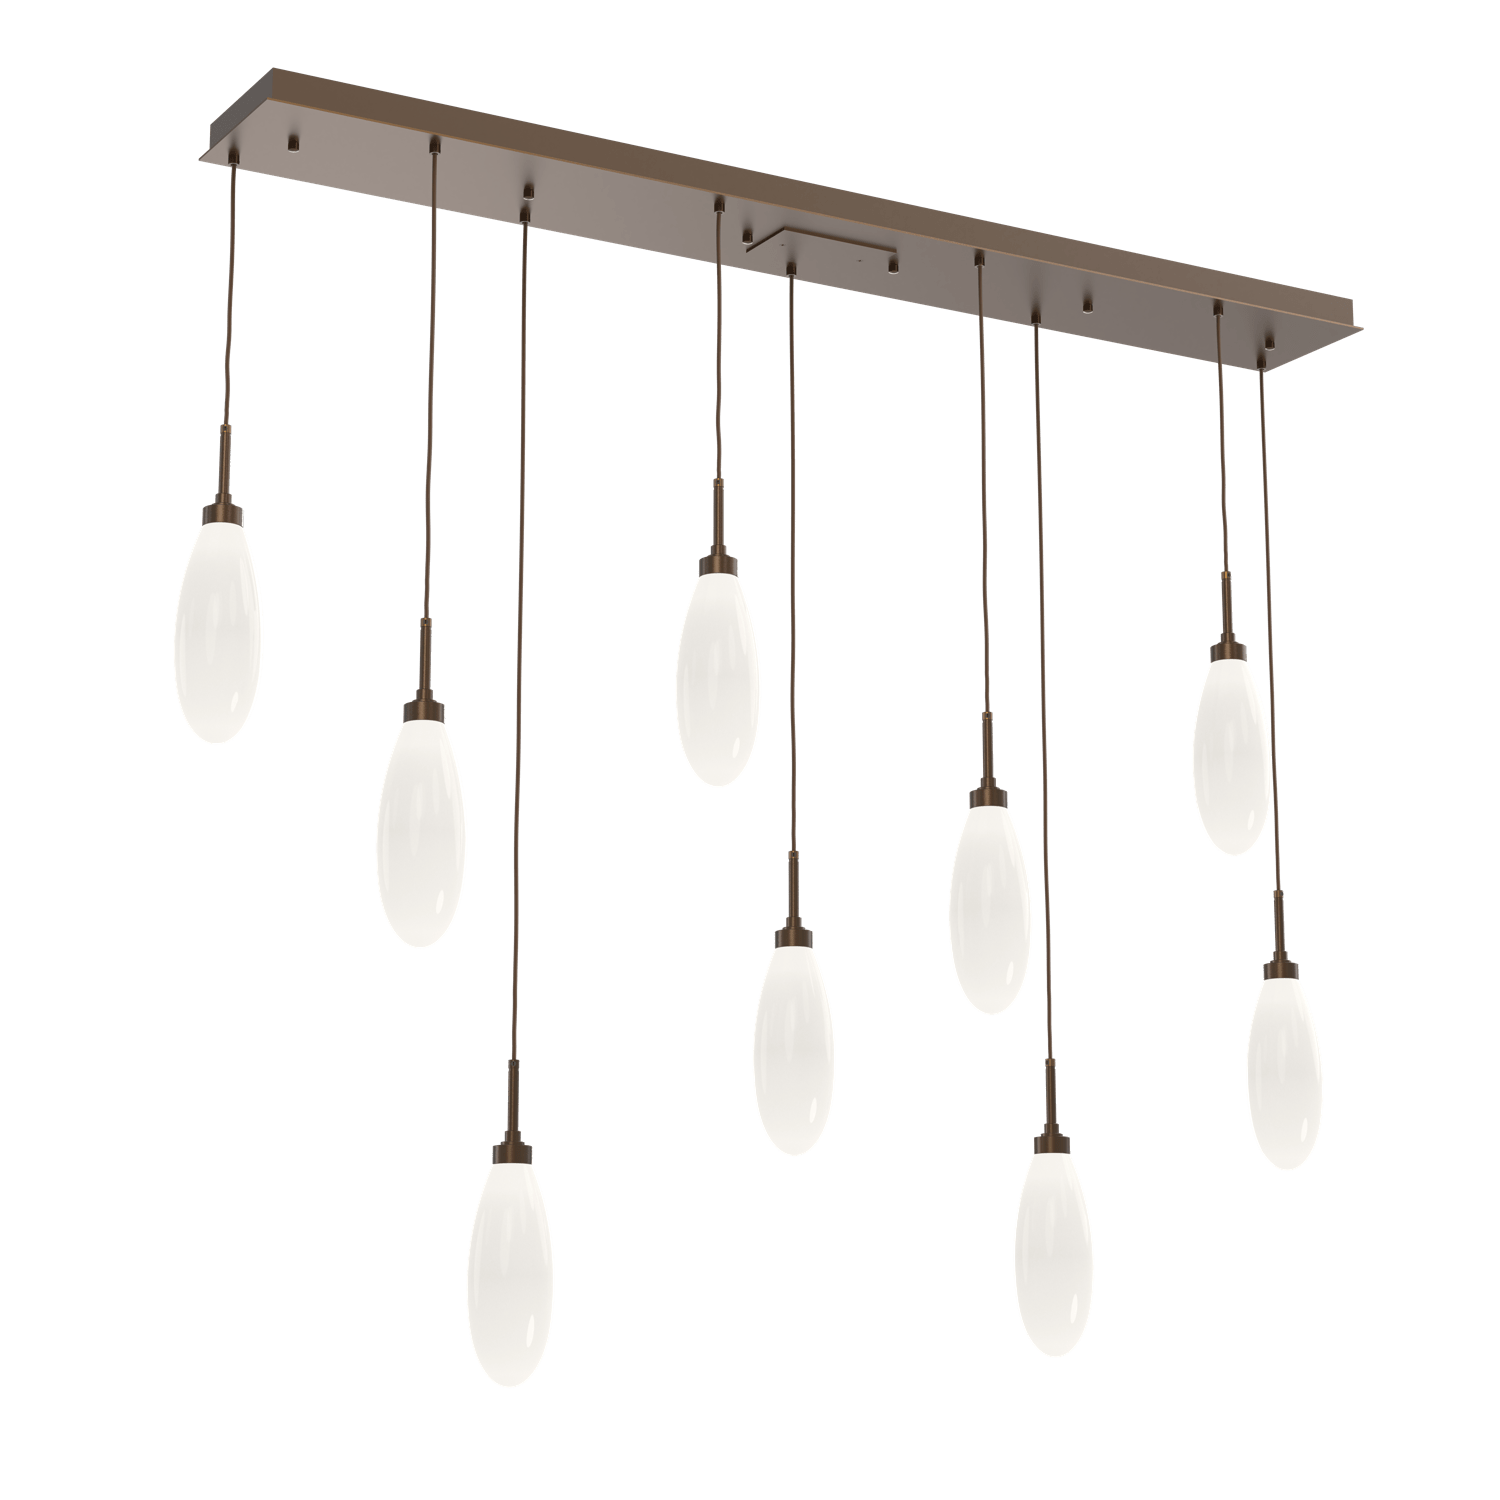 PLB0071-09-FB-WL-LL-Hammerton-Studio-Fiori-9-light-linear-pendant-chandelier-with-flat-bronze-finish-and-opal-white-glass-shades-and-LED-lamping